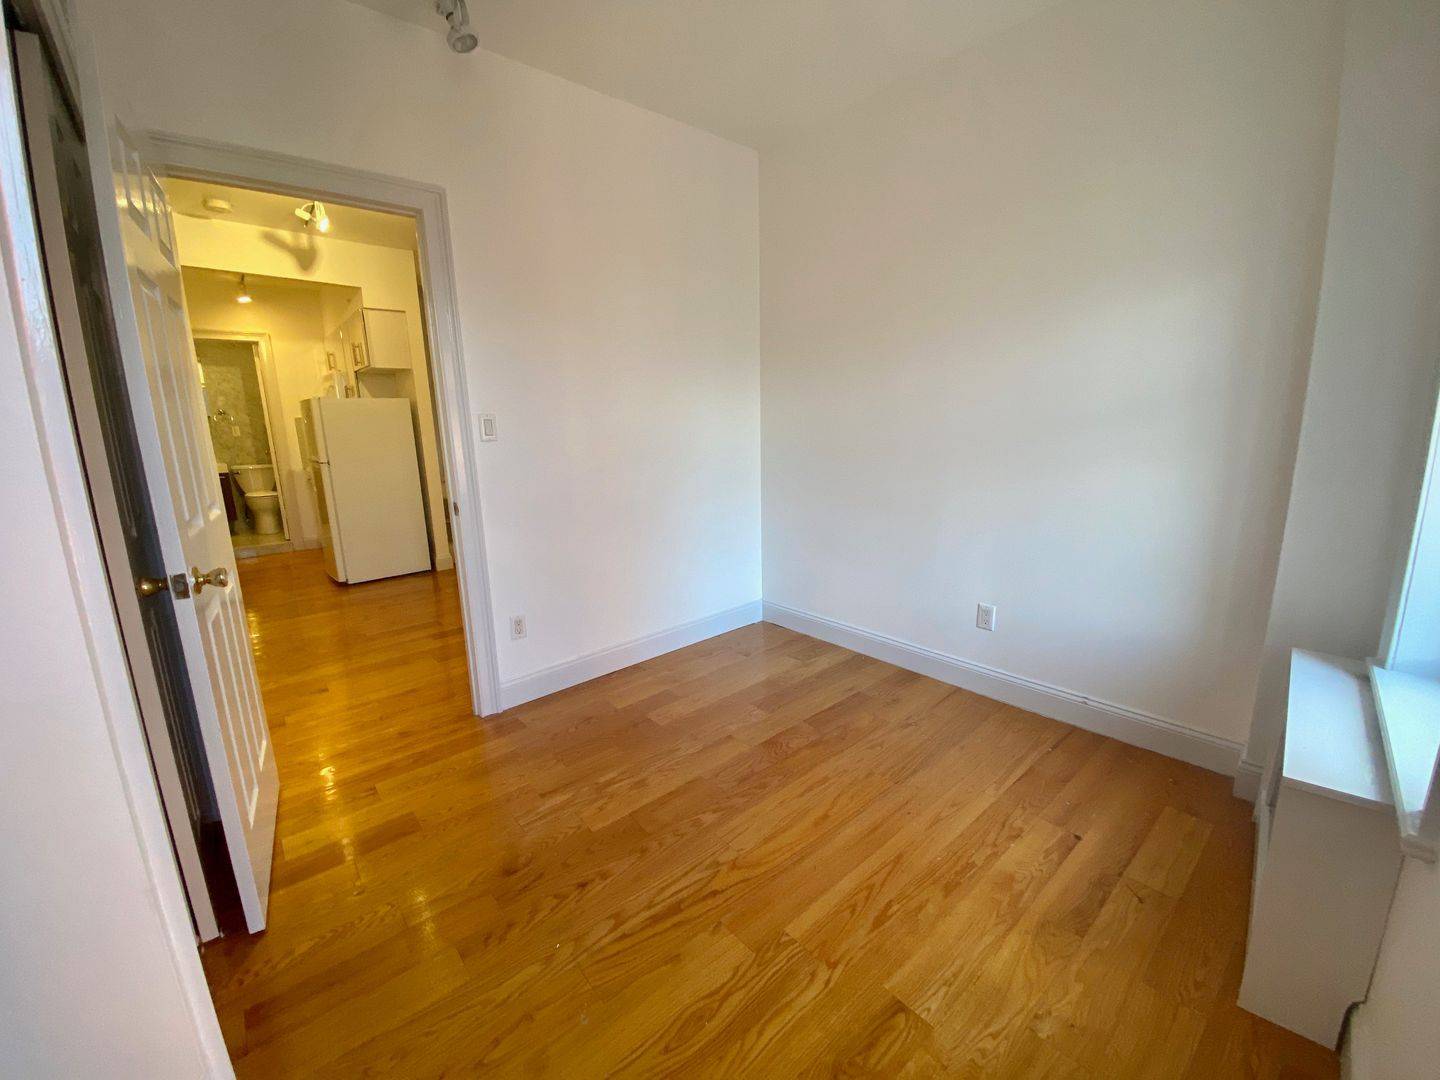 3 months free + no fee NoLIta location NYC  dining, nightlife. Incredibly convenient for transit – less than a minute to the subway! Conveniently located near the 6, N, R, B, D, F, M subway lines. Easy commute